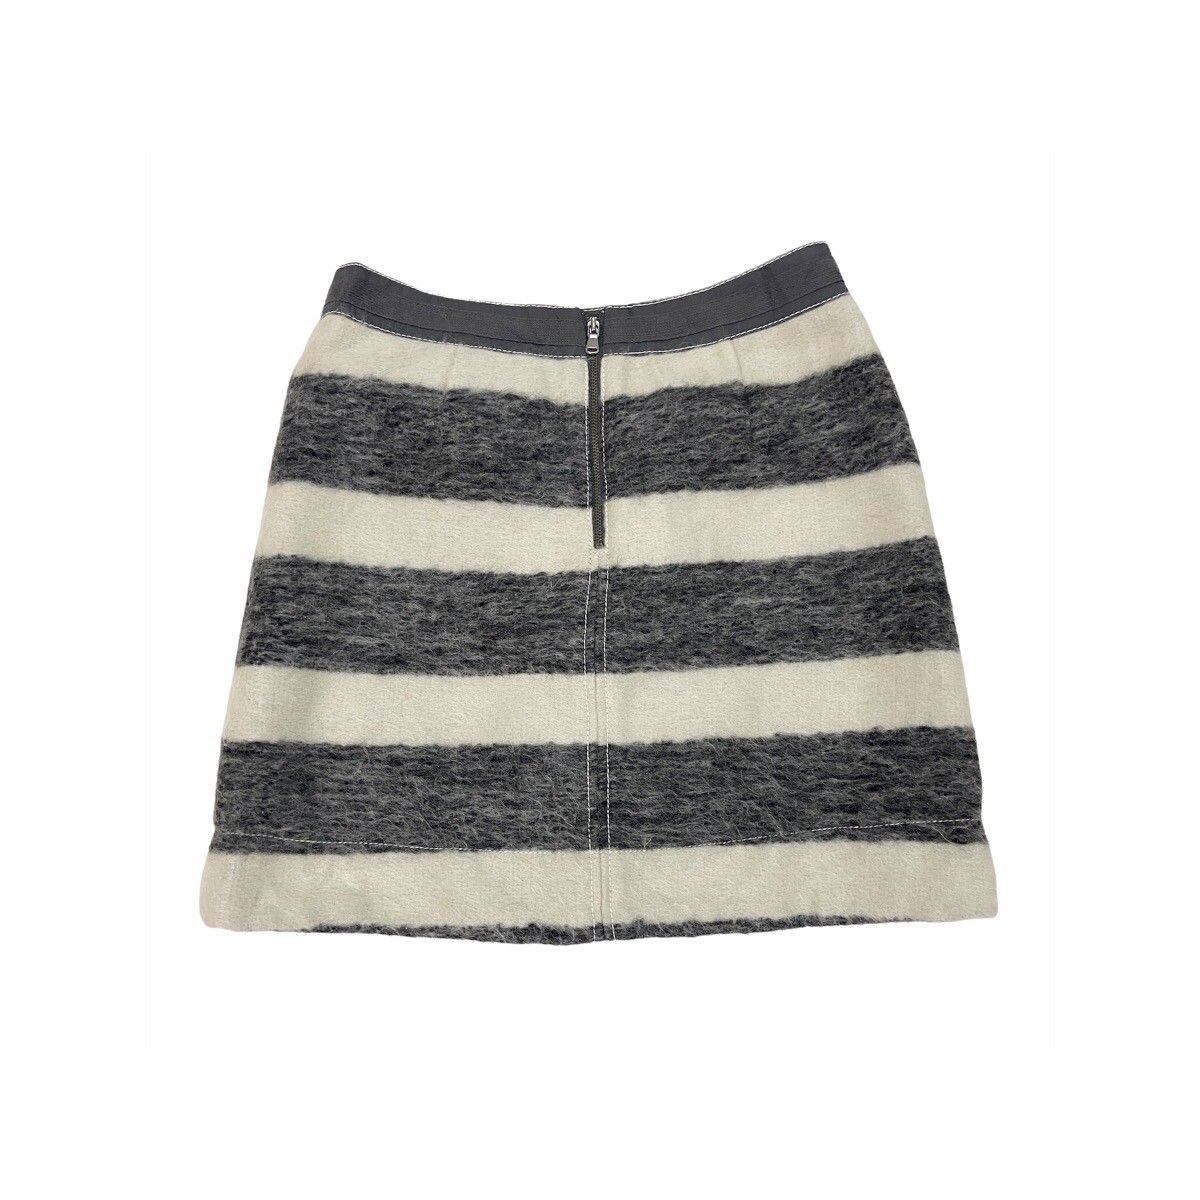 Marc by Marc Jacobs Wool Skirts - 1